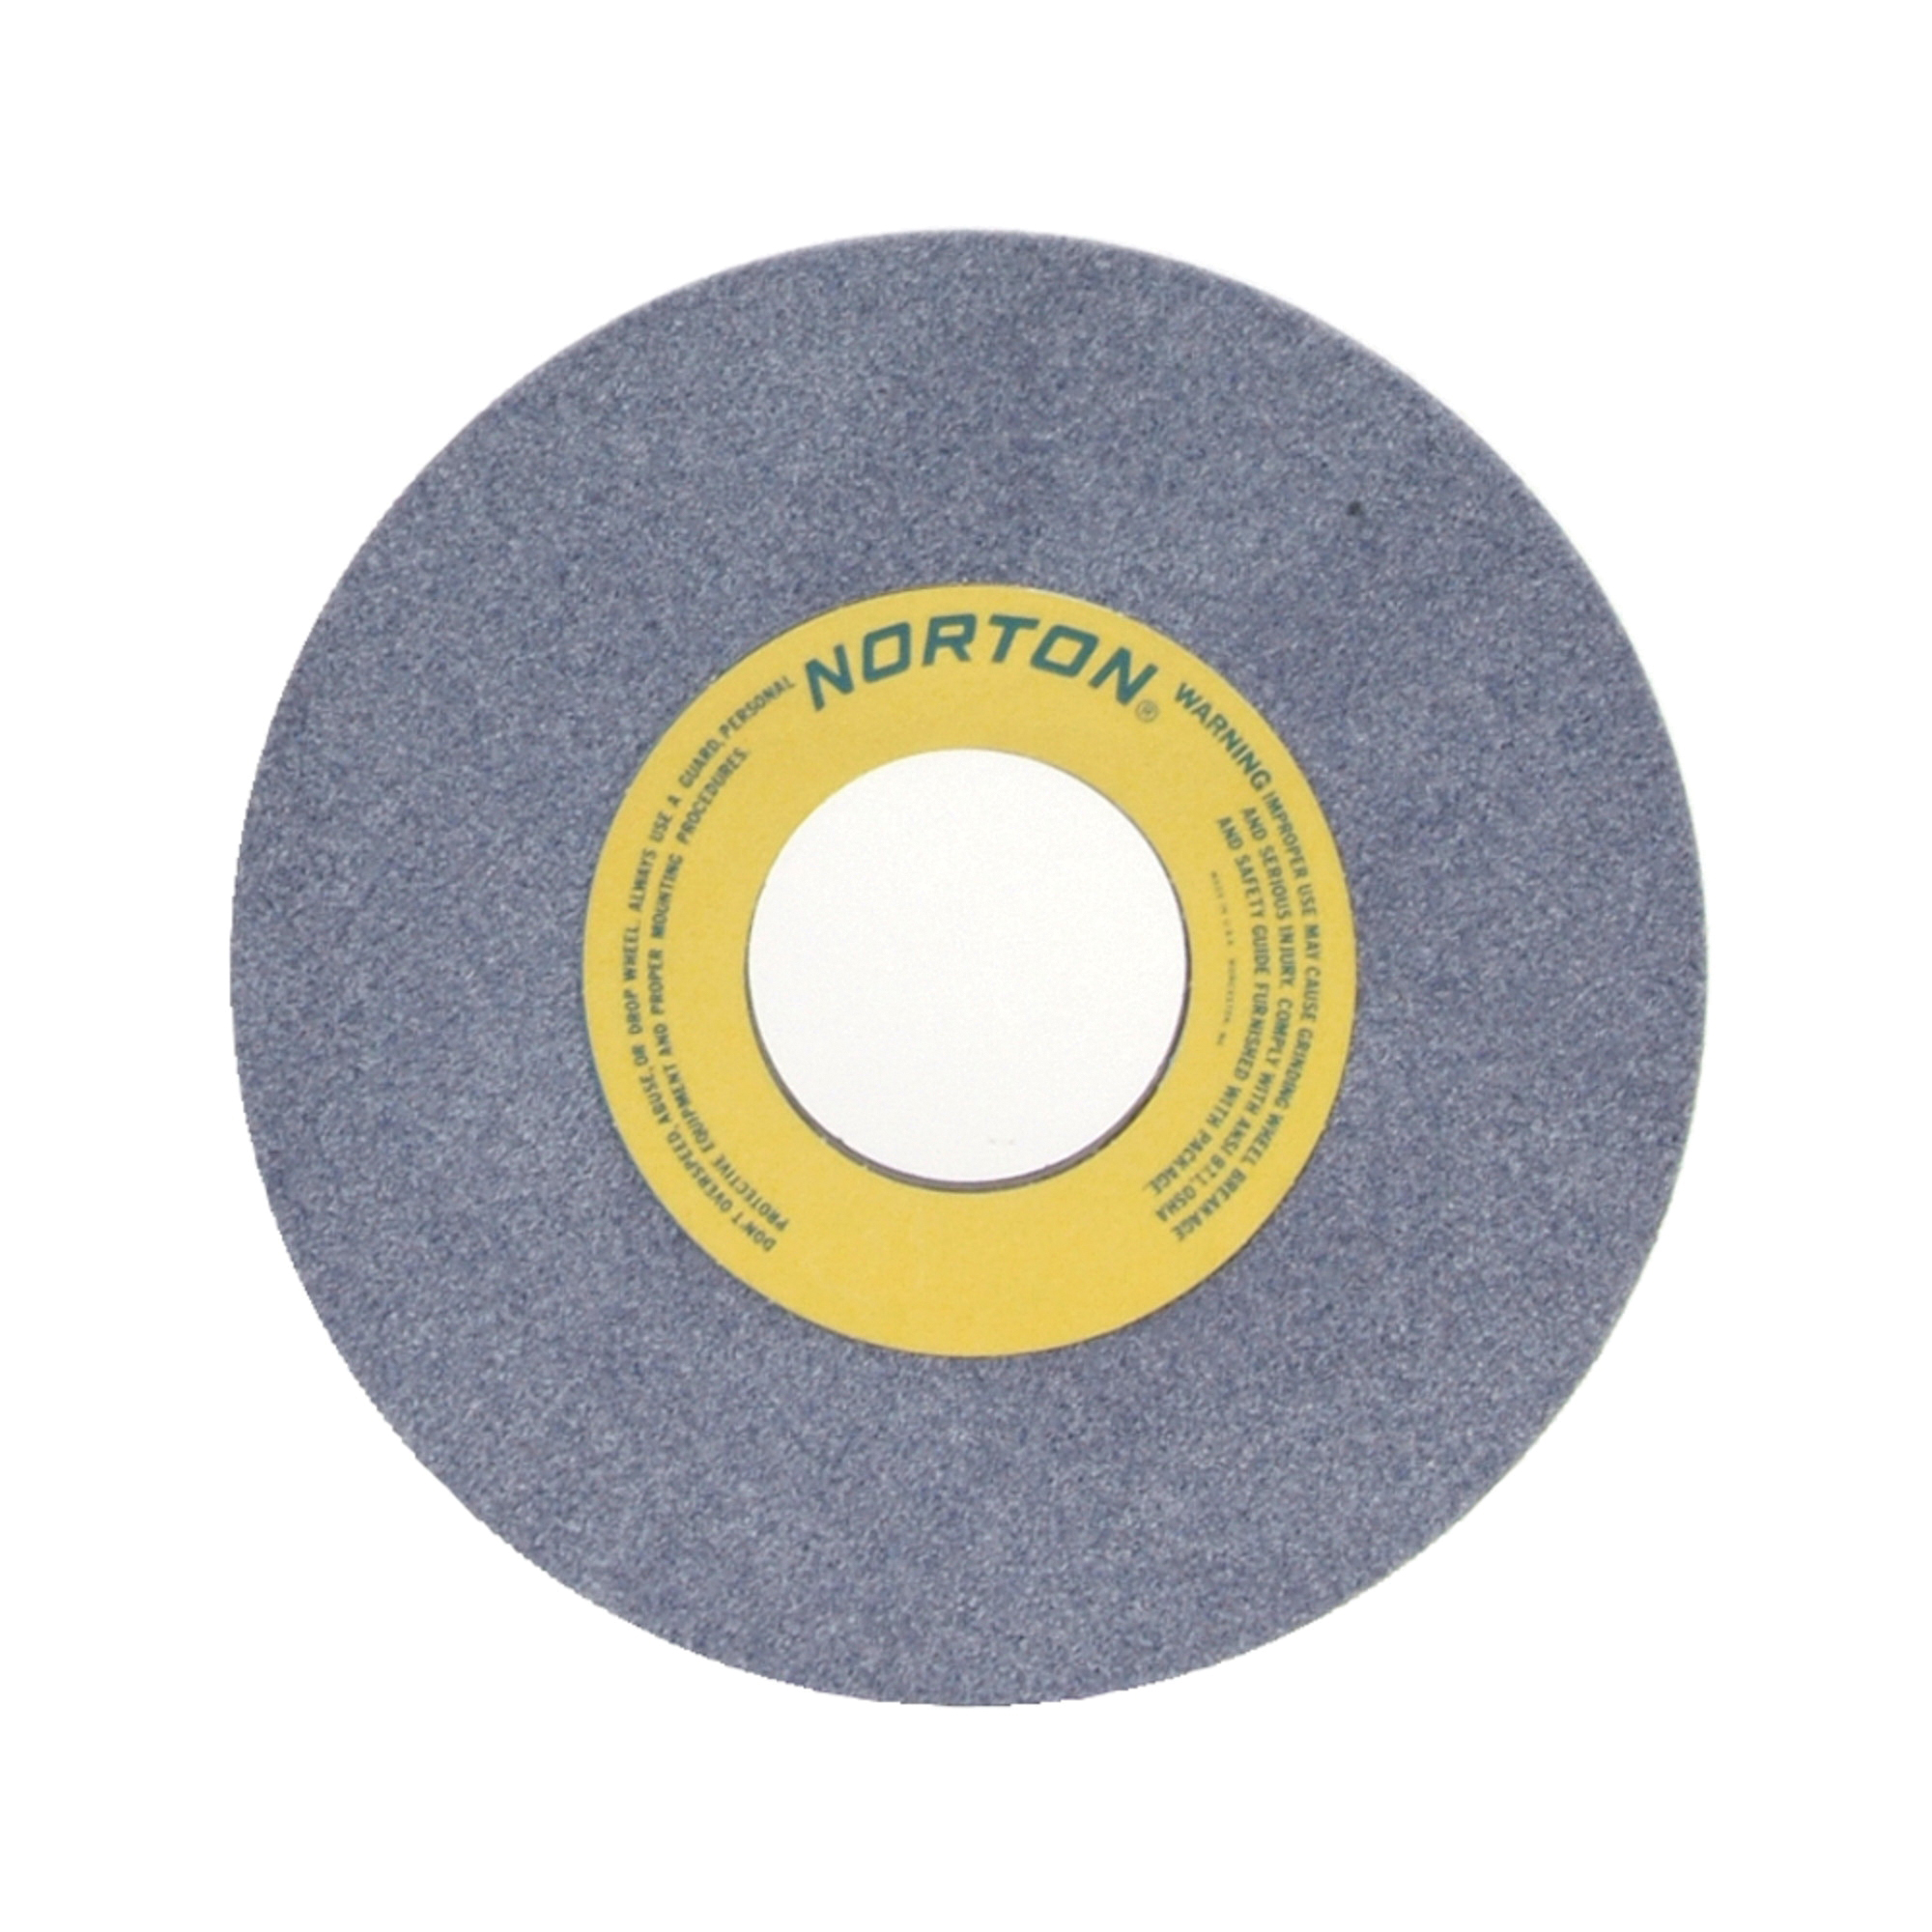 Norton® 66253138903 32AA Straight Toolroom Wheel, 10 in Dia x 1 in THK, 3 in Center Hole, 46 Grit, Aluminum Oxide Abrasive